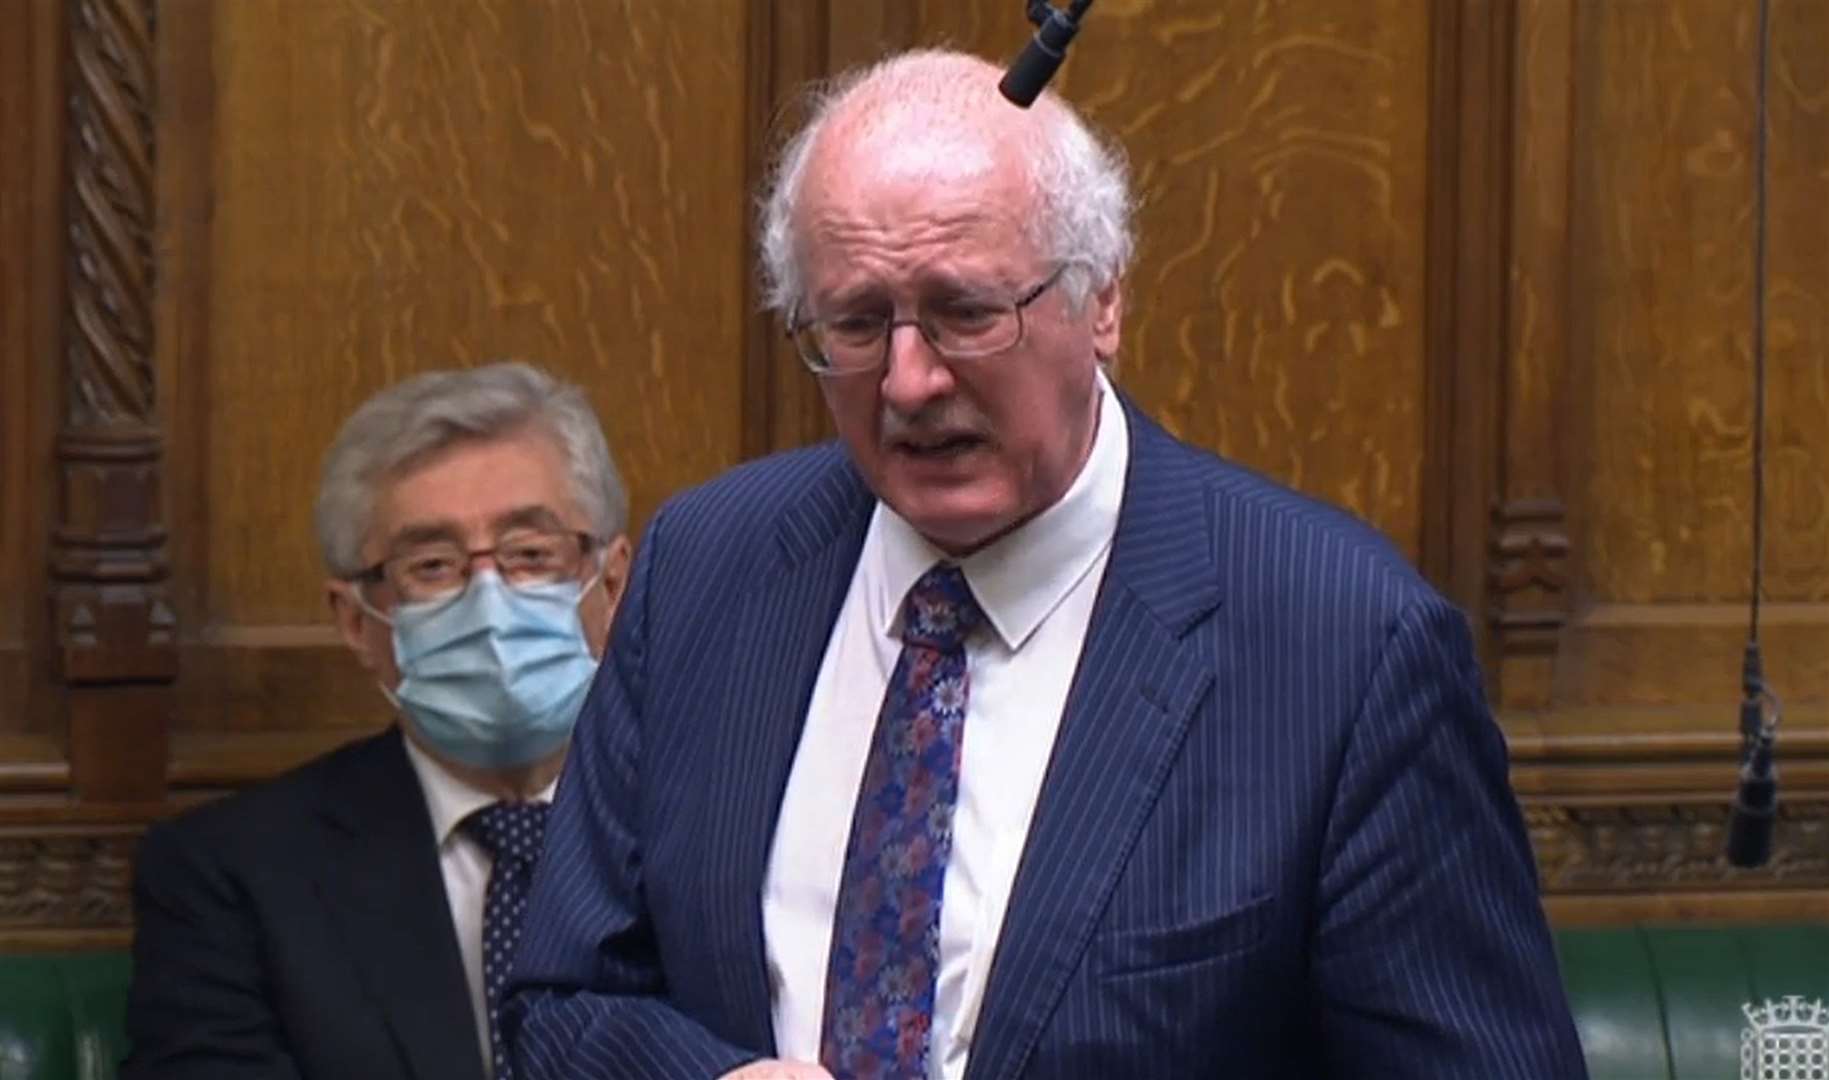 Jim Shannon accused the NI Secretary of trying to bully his party (House of Commons/PA)